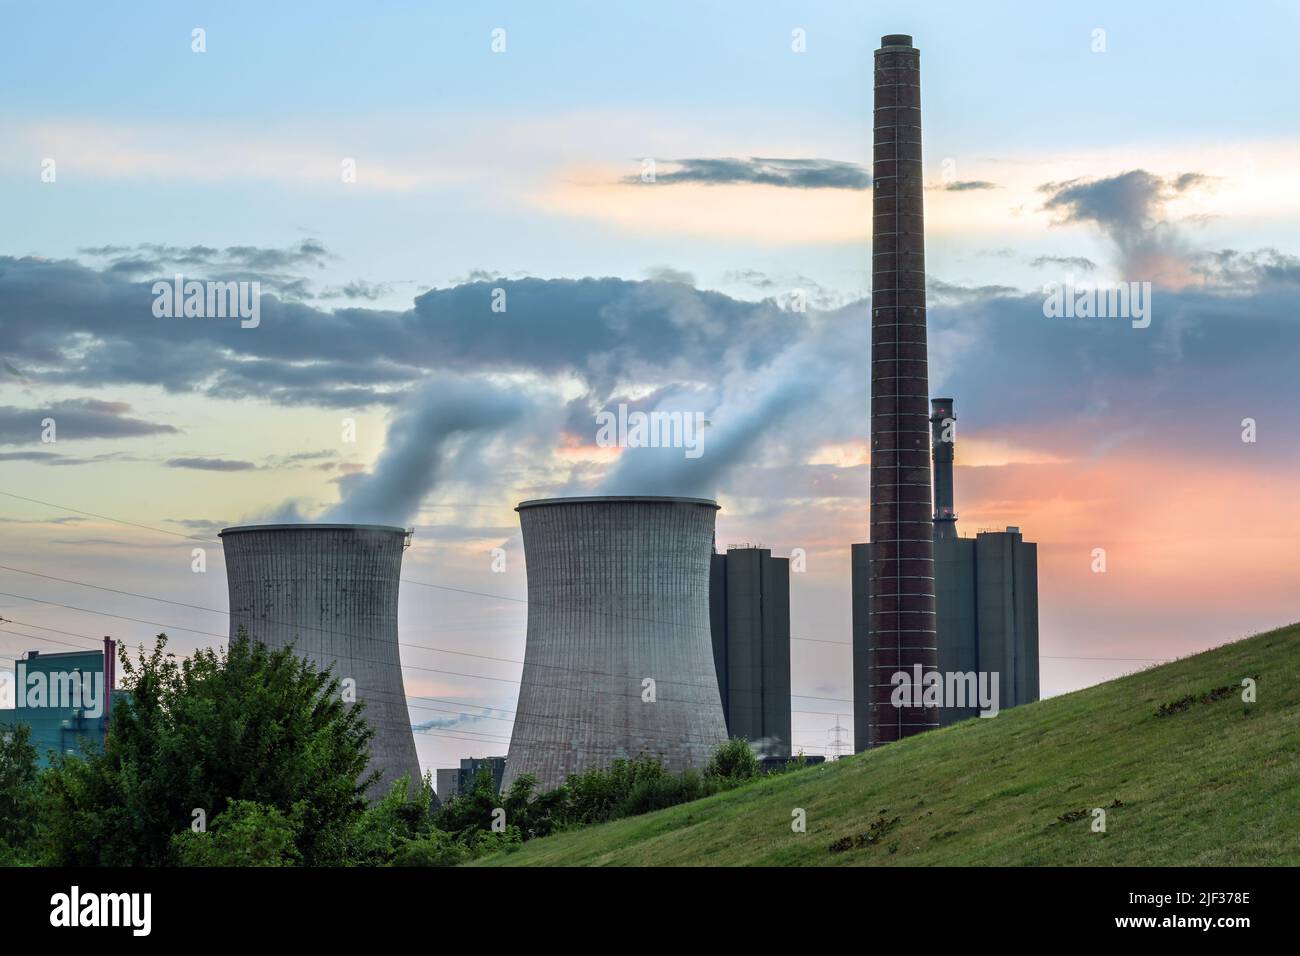 Heavy power plant industry, chimney and towers with pollution at the HKM steelworks in Duisburg, Germany against a cloudy sky at sunset, copy space, s Stock Photo